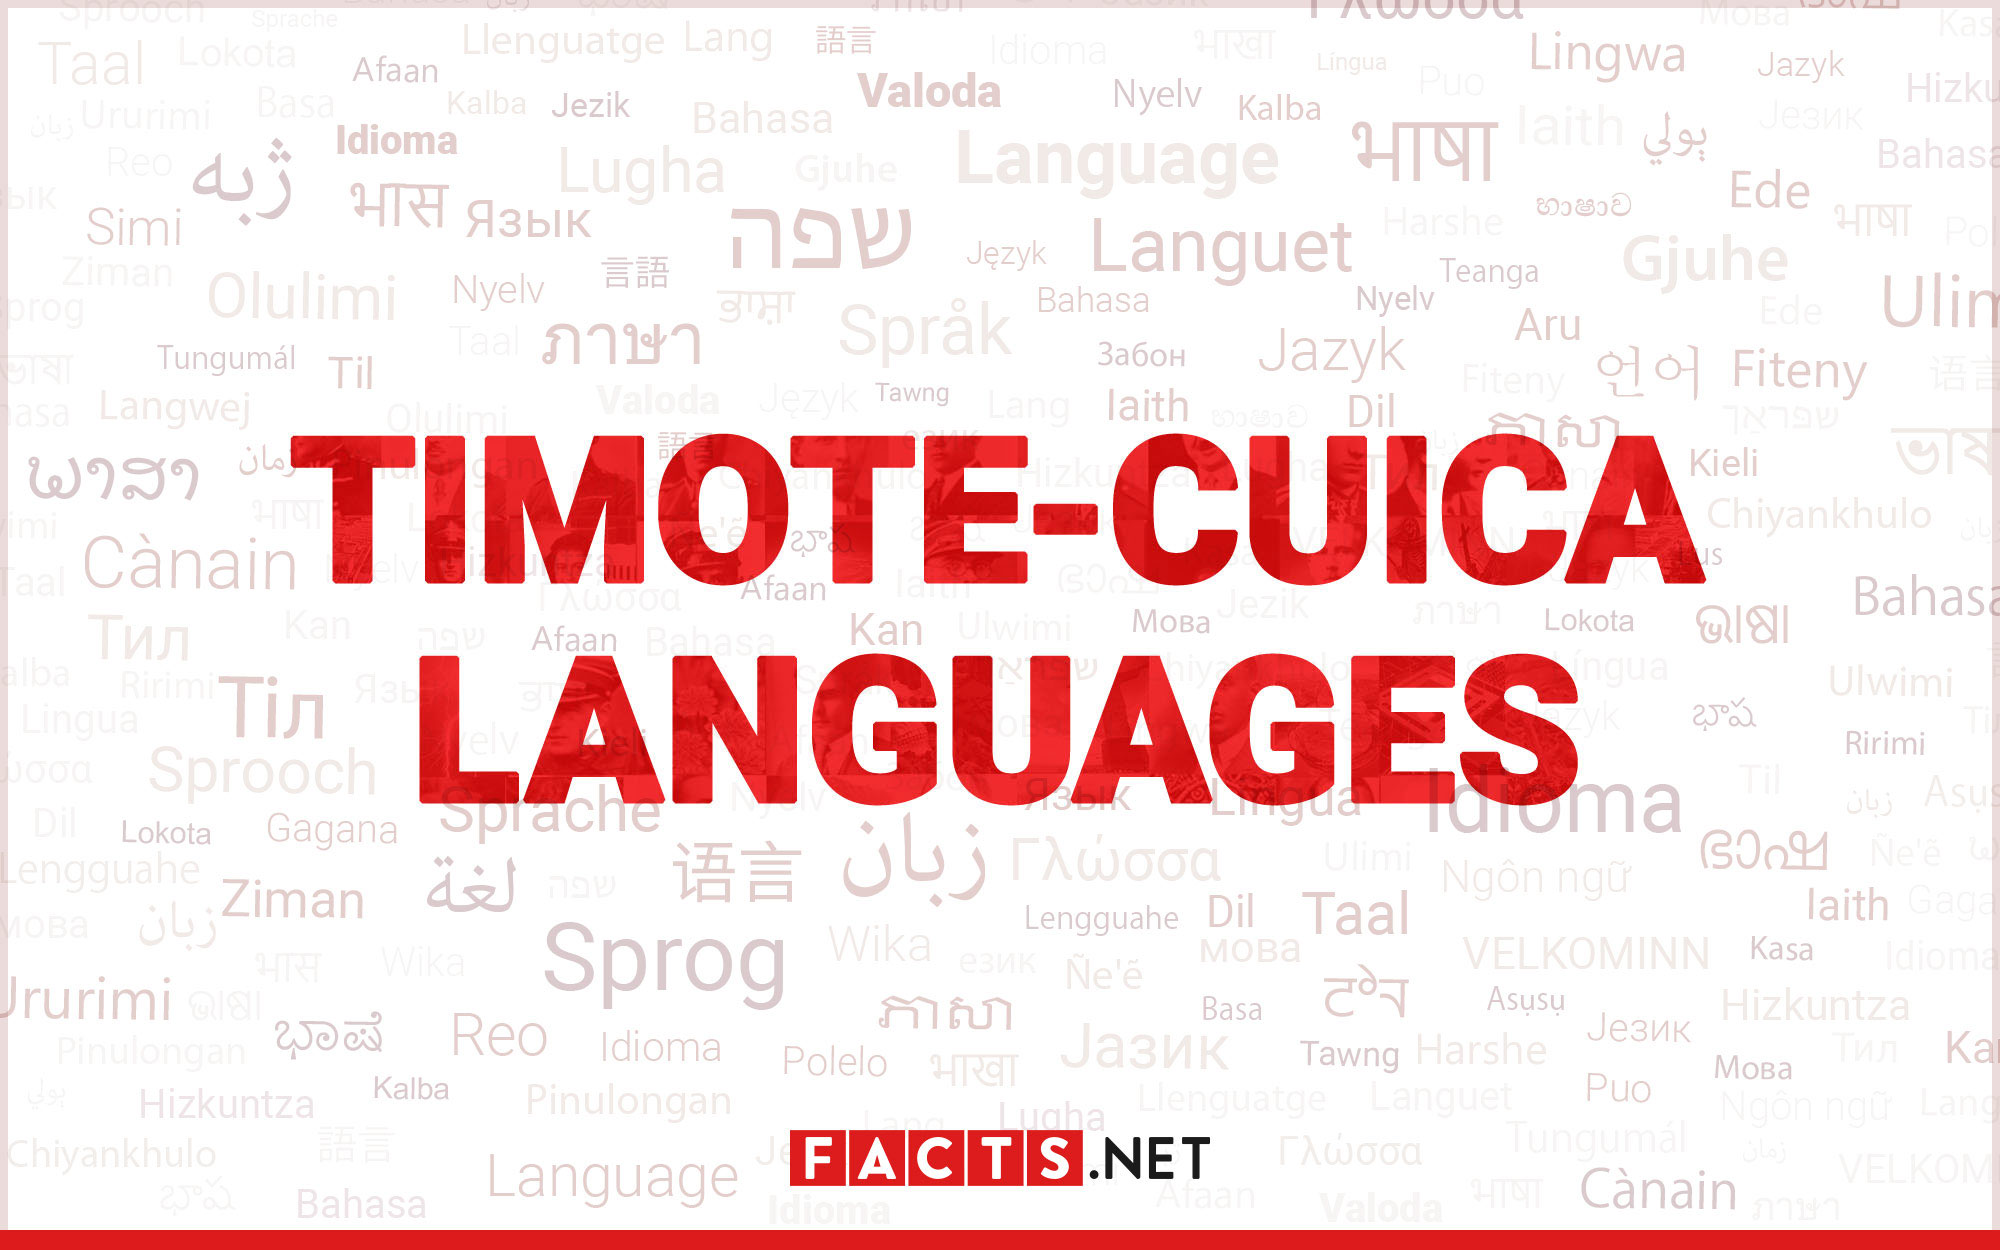 13-astounding-facts-about-timote-cuica-languages